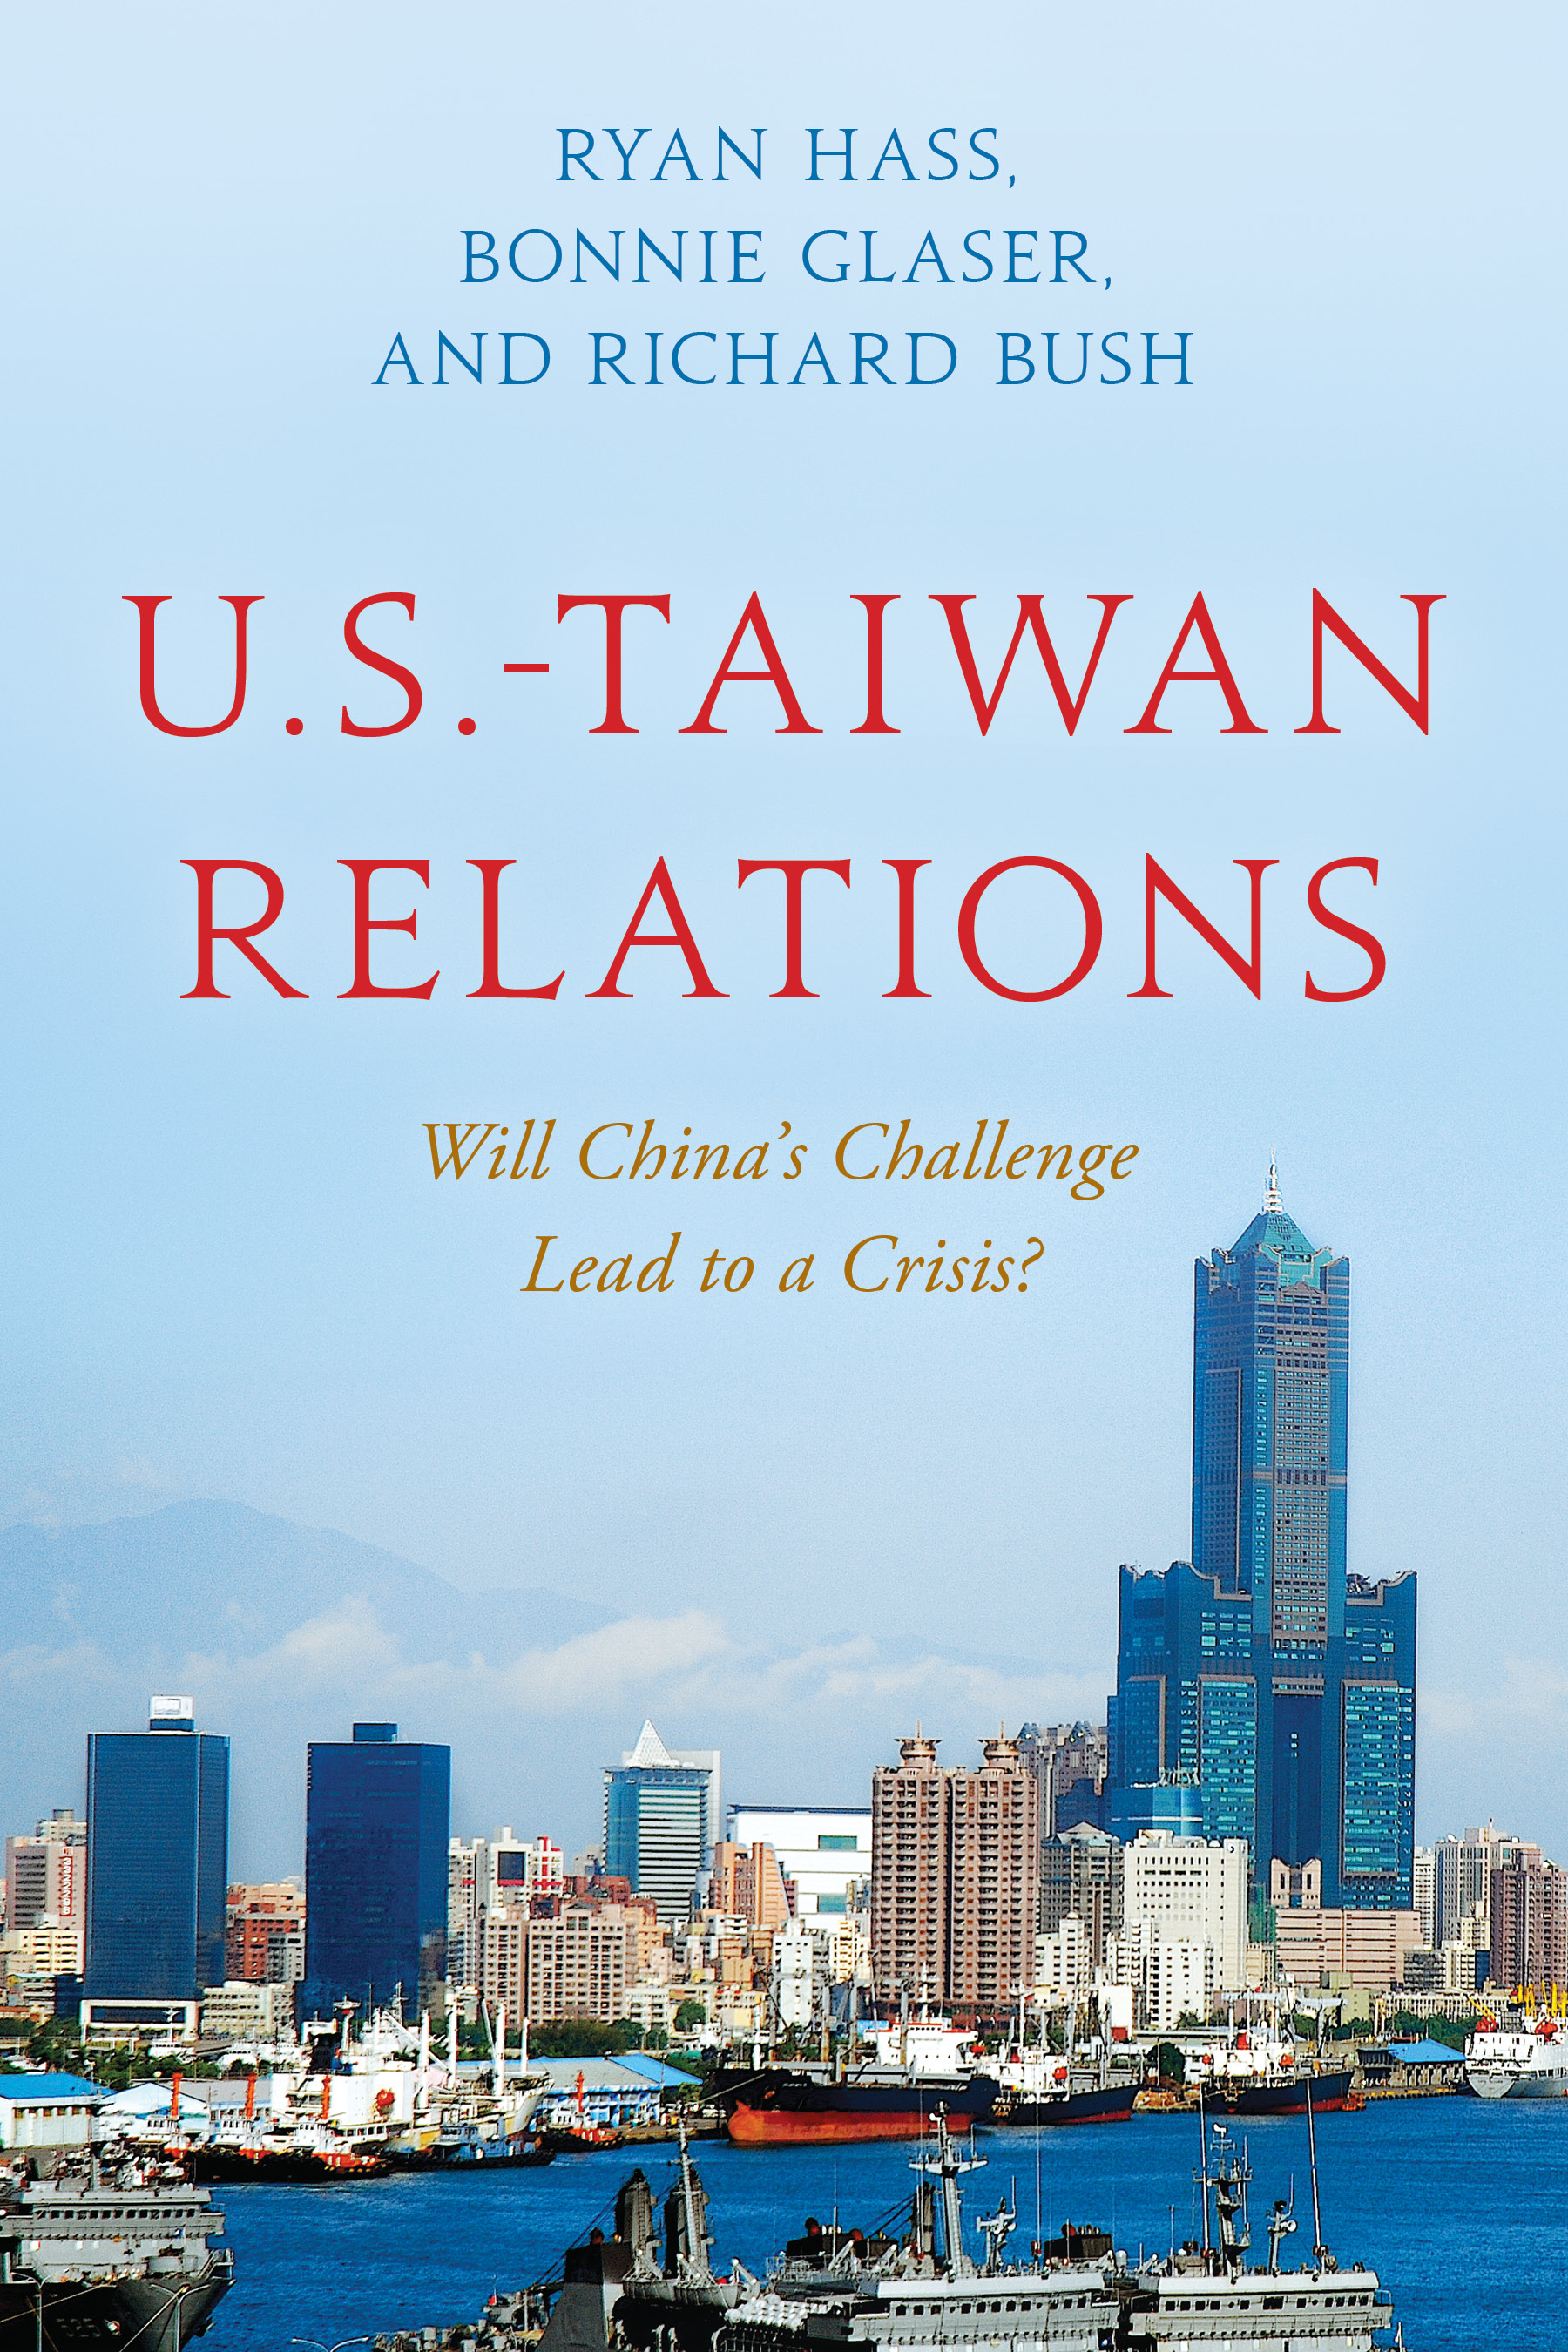 U.S.-Taiwan Relations: Will China's Challenge Lead to a Crisis?